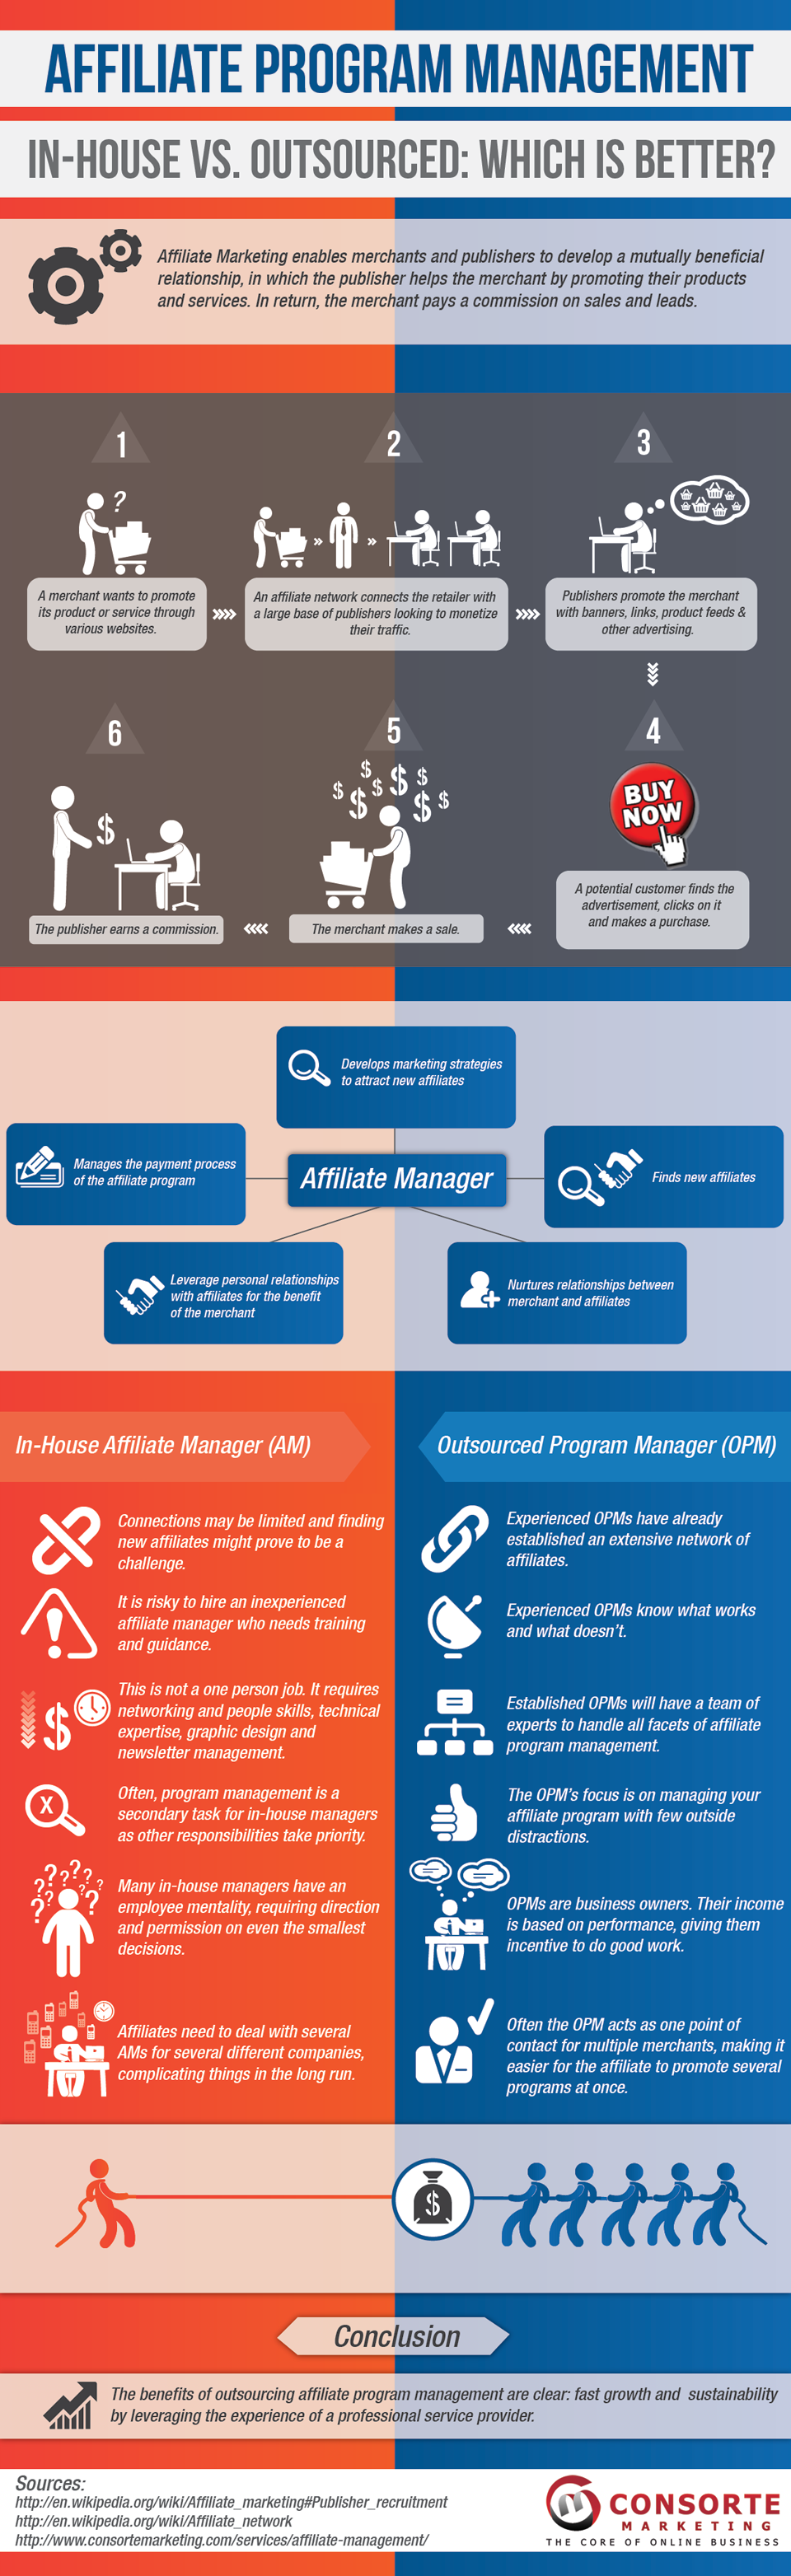 In-house vs. Outsourced Affiliate Program Management